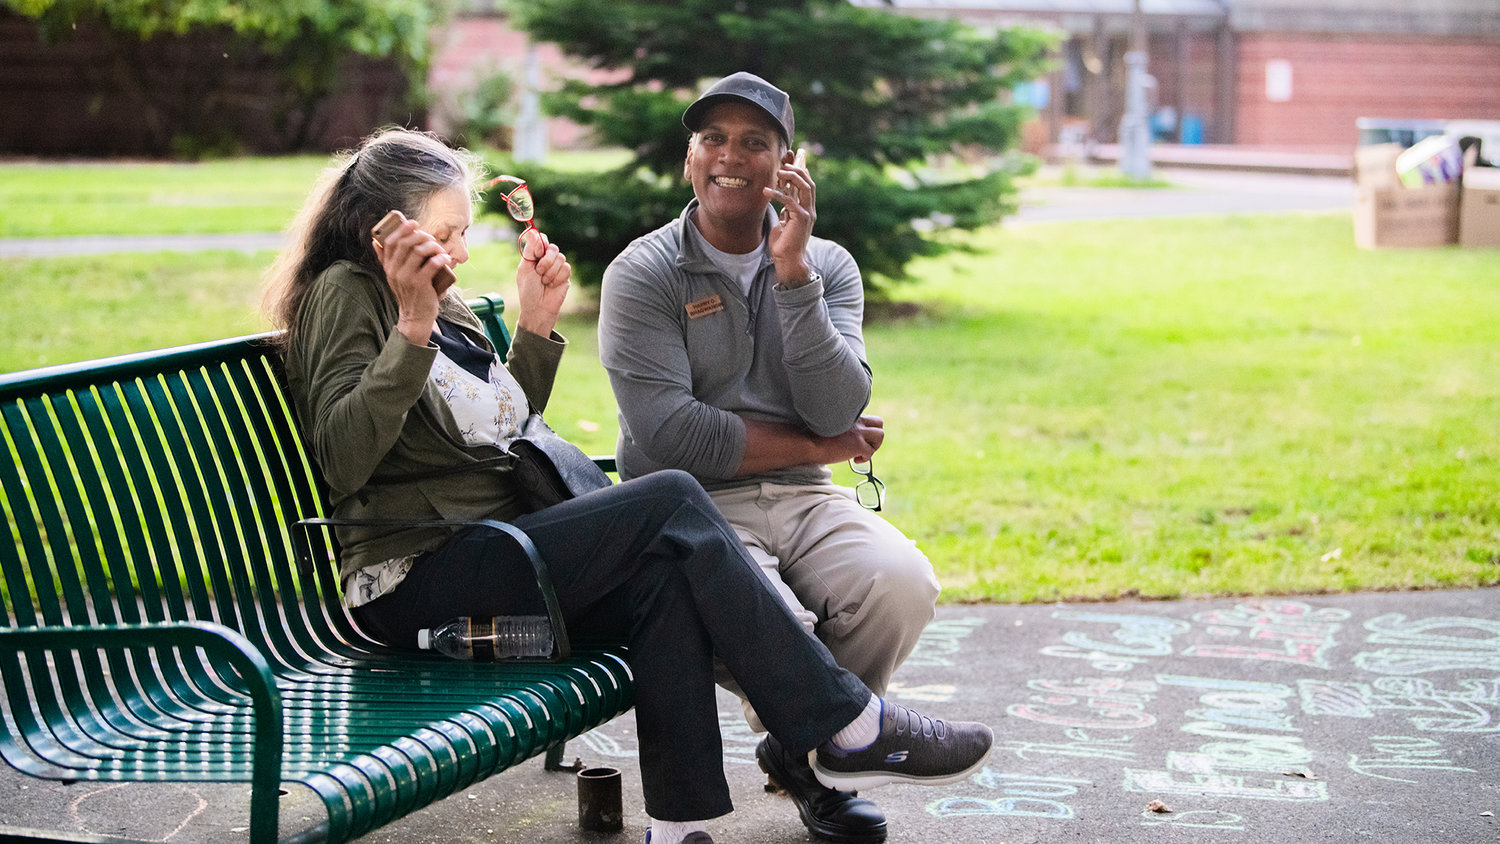 Lewis County Commissioner Candidate Harry Bhagwandin smiles while talking about election results with Bonnie Canaday, on the phone, Tuesday at George Washington Park in downtown Centralia. He's currently in second place to represent district 3 on the Board of County Commissioners.